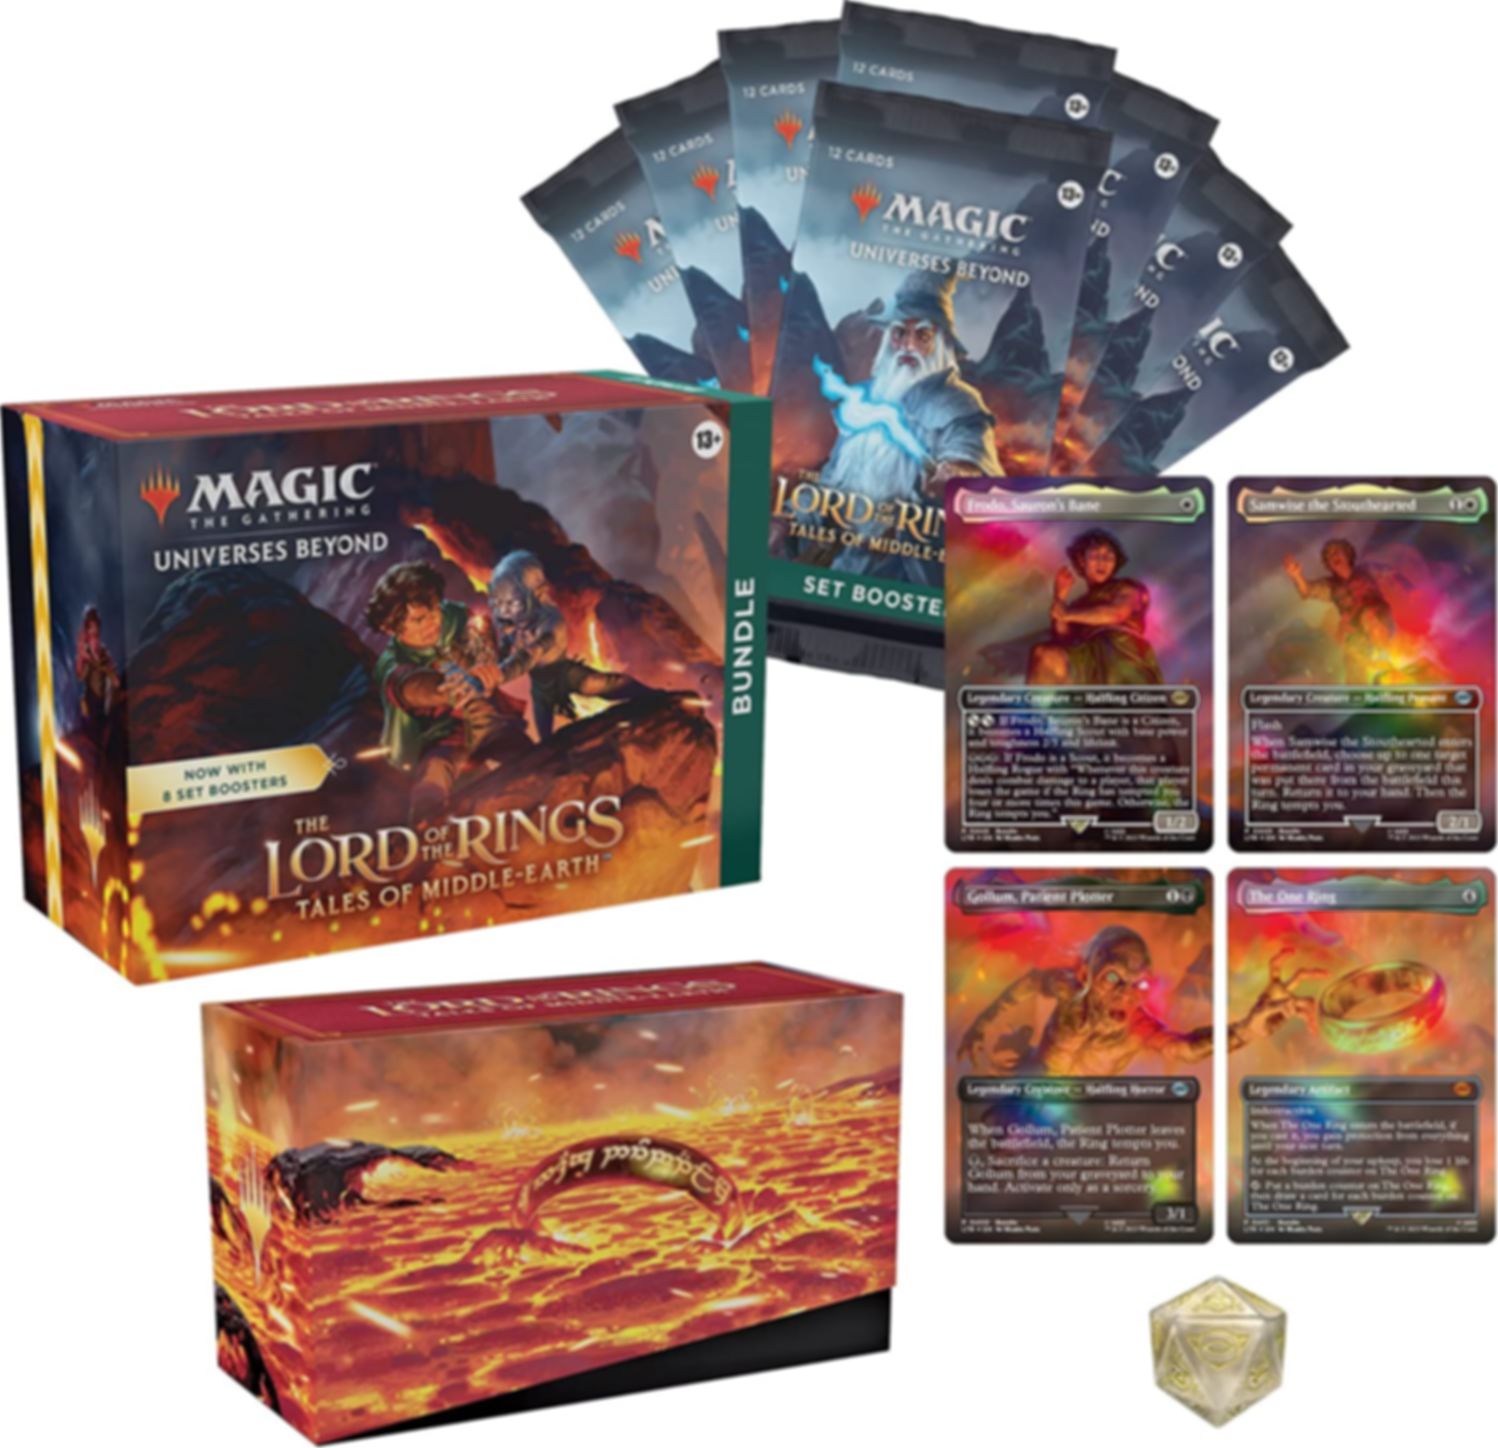 Magic the Gathering: Universes Beyond: The Lord of the Rings: Bundle partes